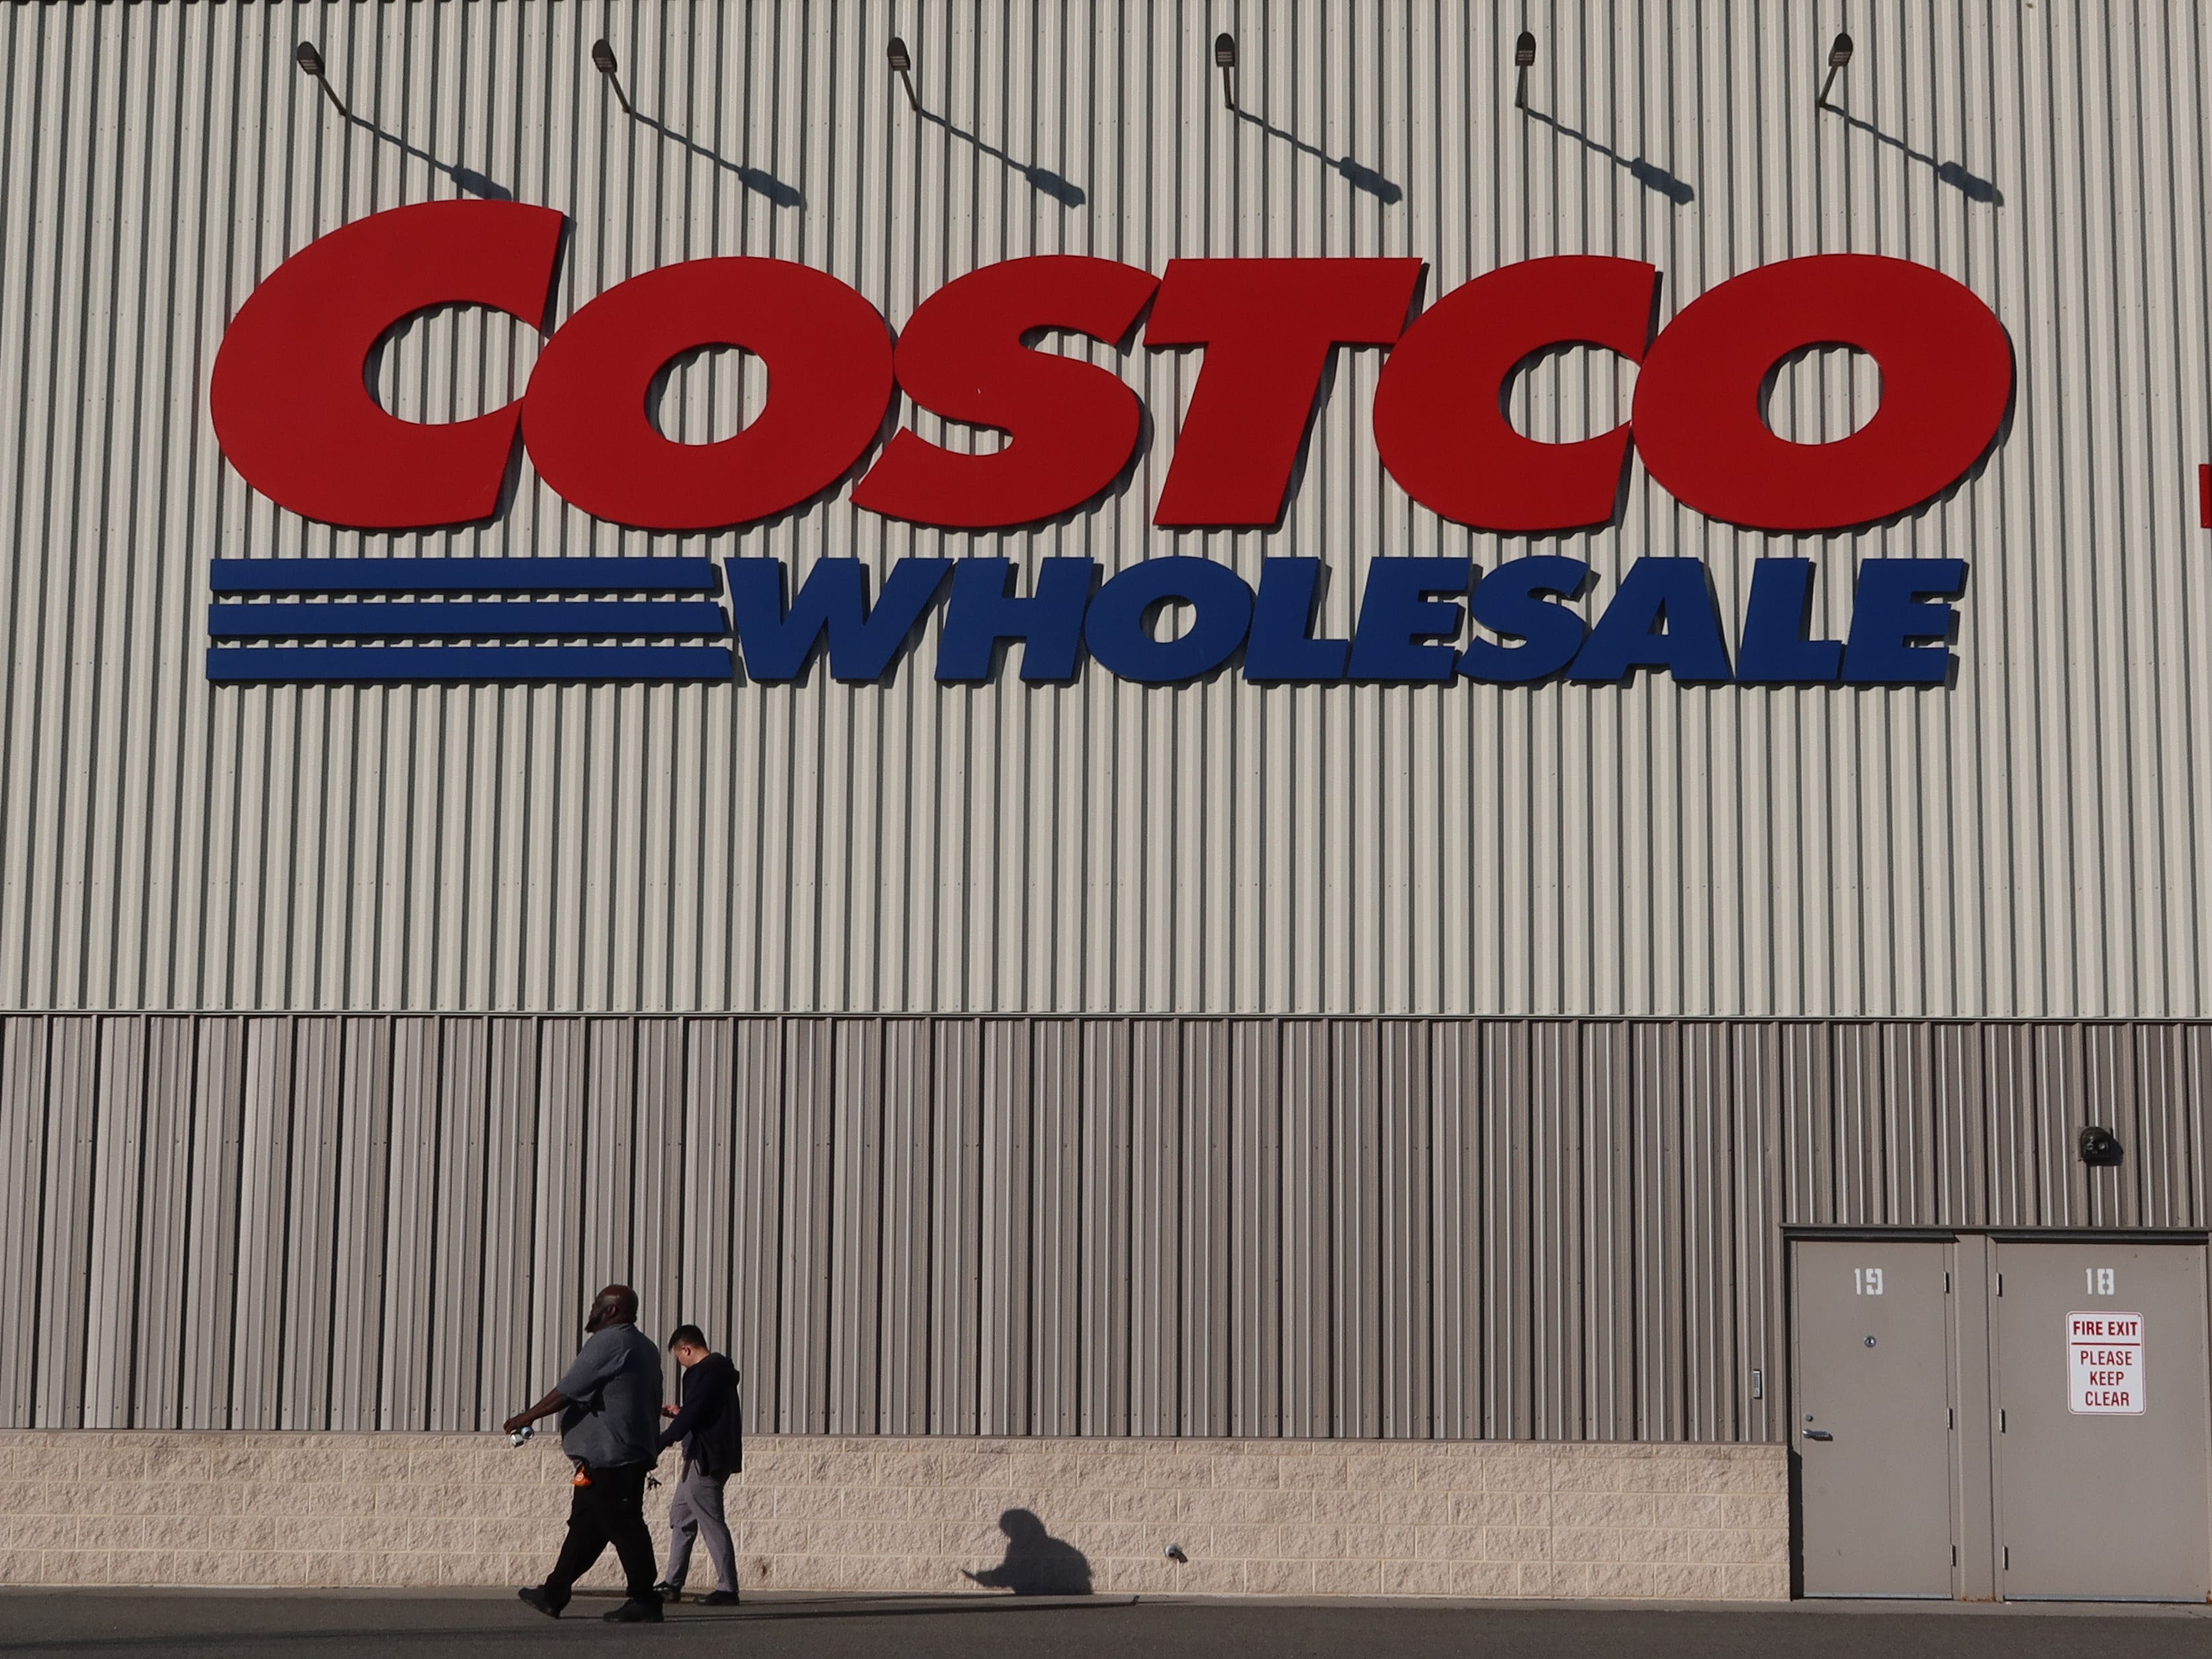 Costco has 3 ways to shop without a membership, but the math still favors paying the fee